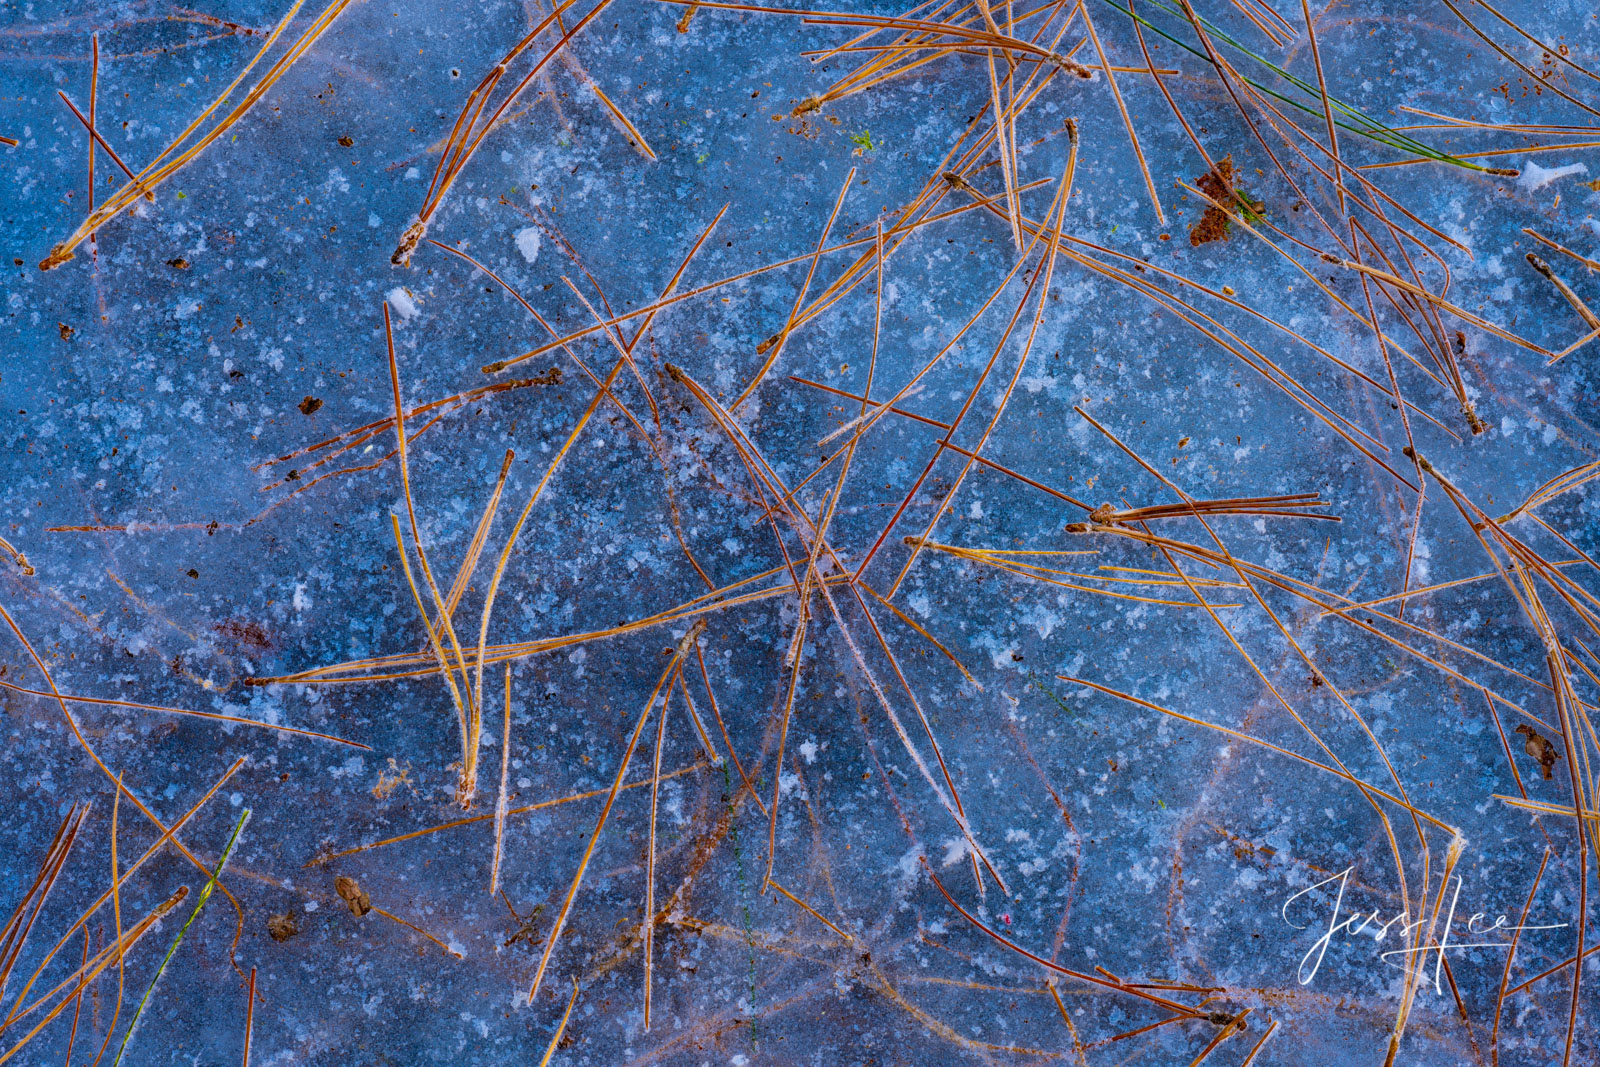 Ice and Pine Needles 1 of 200 California Landscape Prints of Yosemite valley. This is part of the luxurious collection of fine...